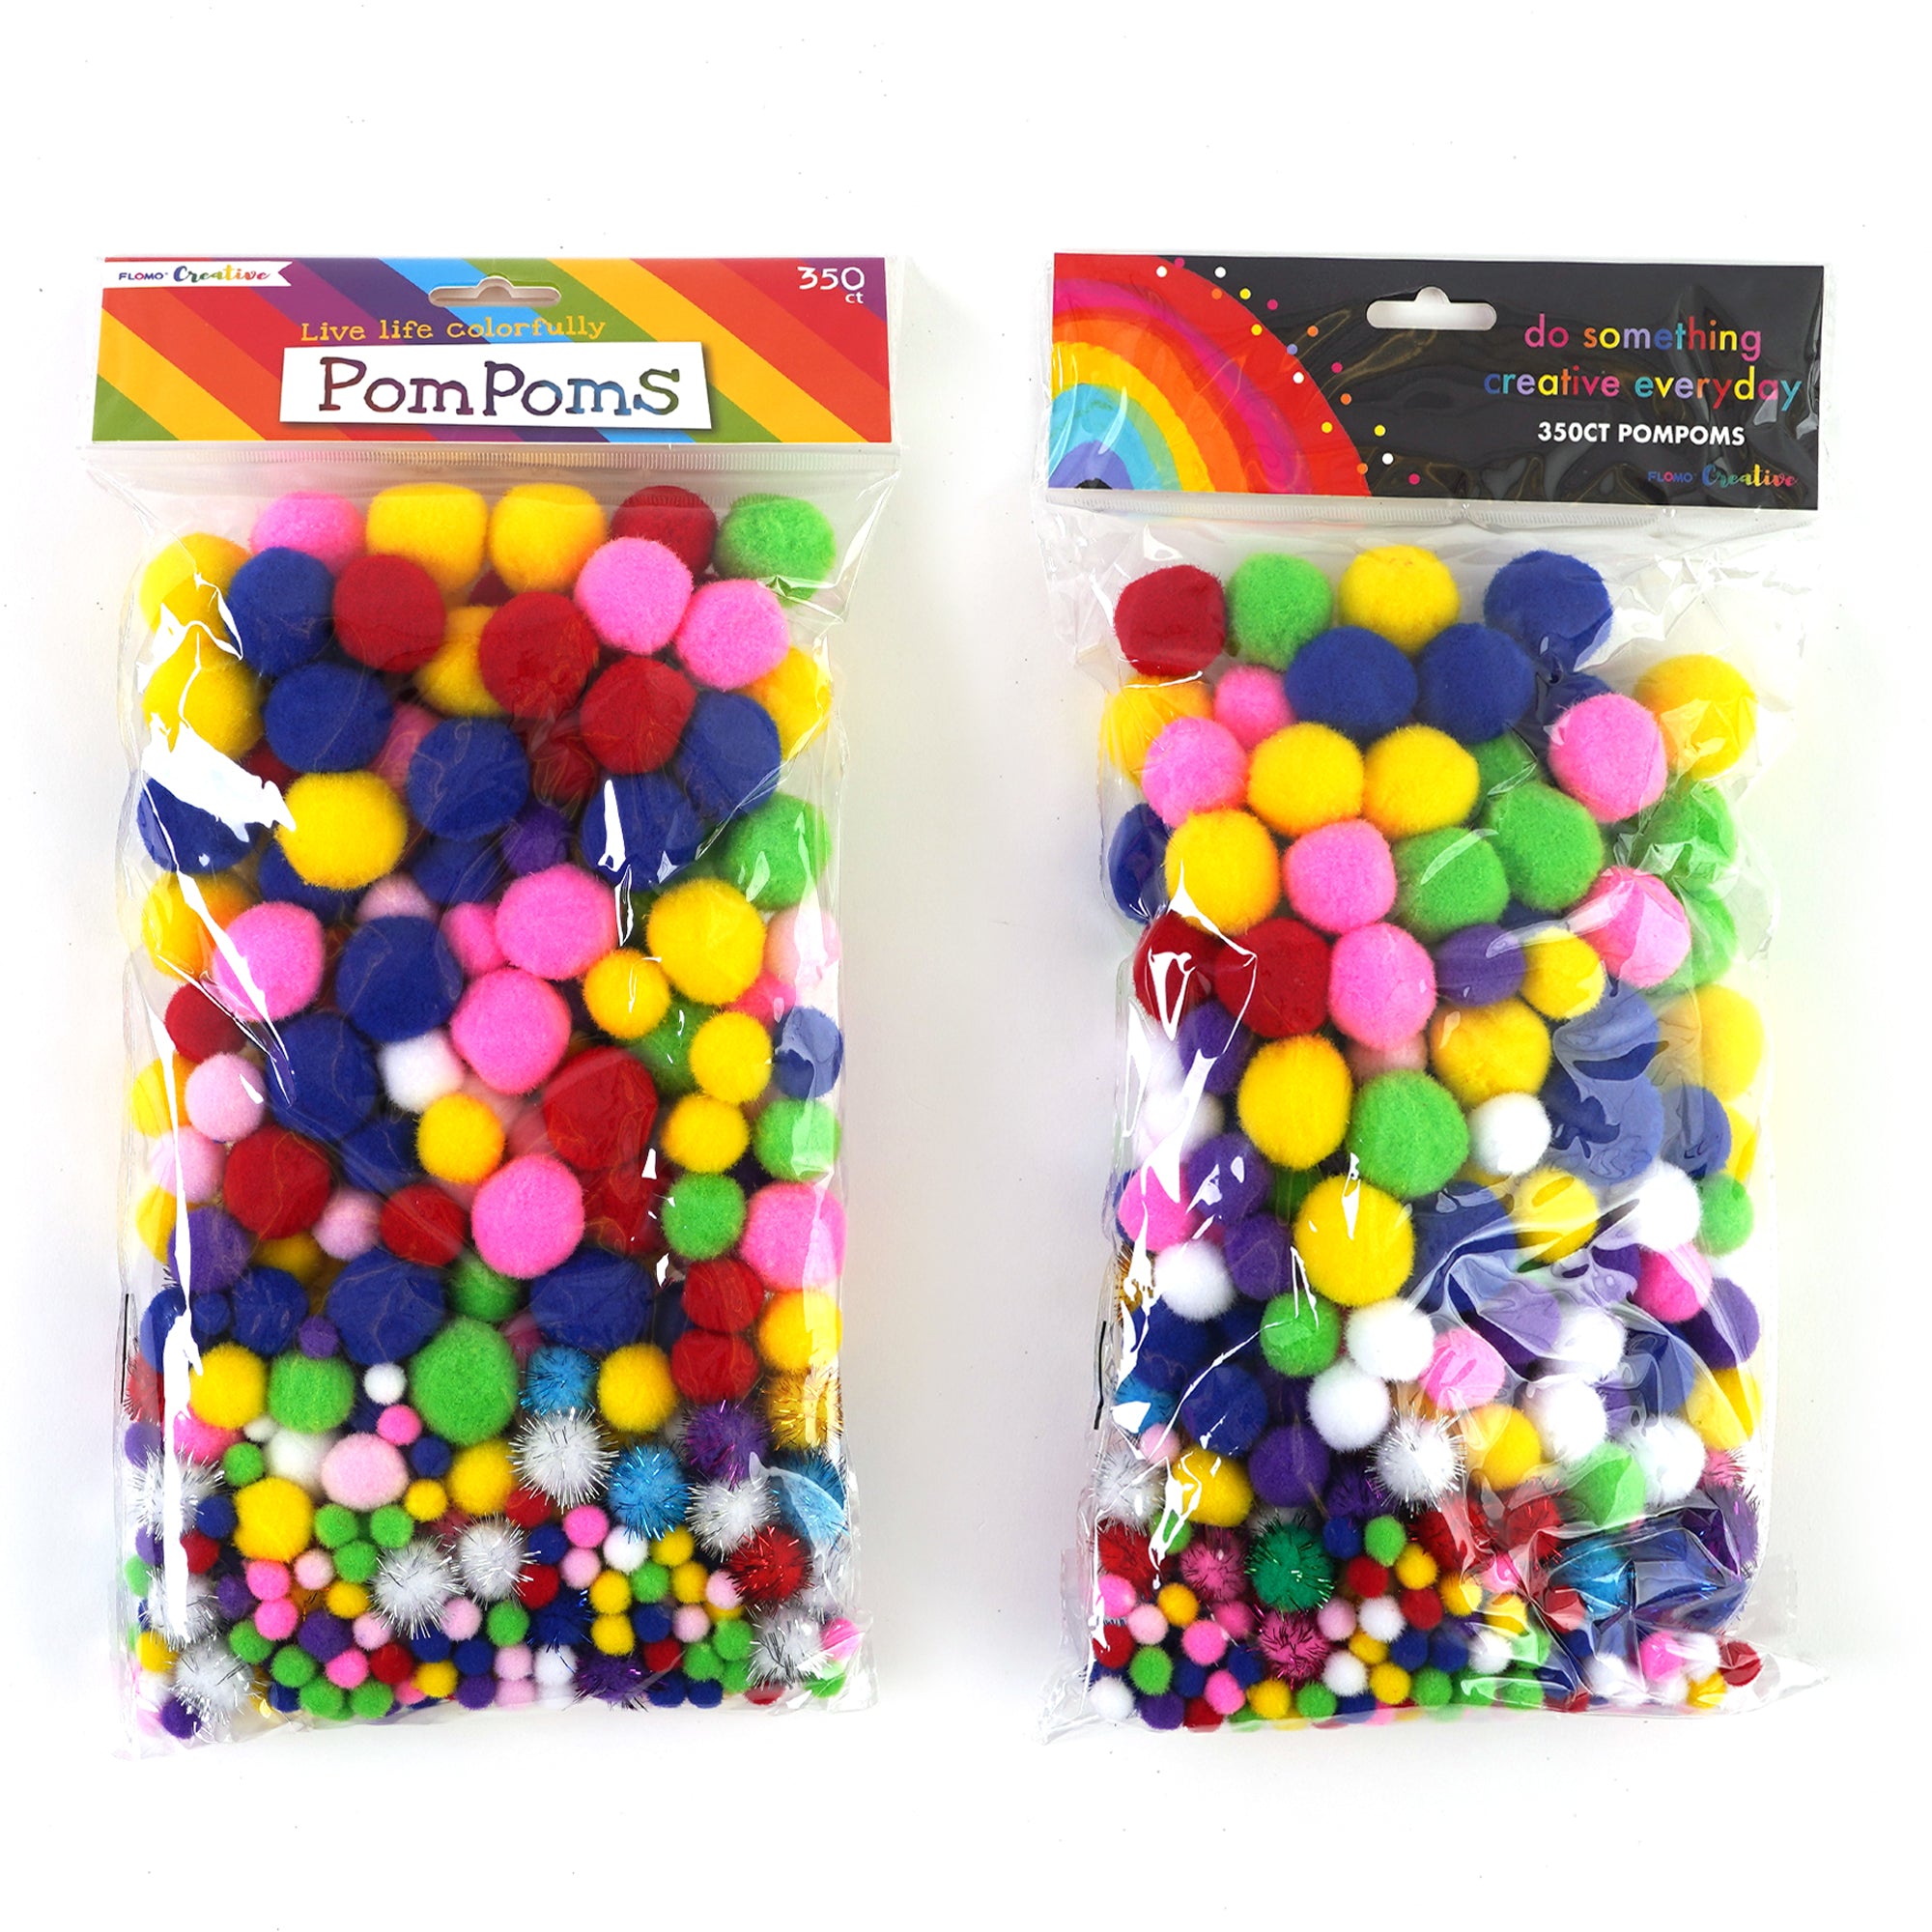 50g Mini Pompoms Crafts 8/10/15/20mm Mixed Color Decorative Pompoms Colored  Pompoms For Hand Operated, Phone Case, DIY,Christmas - AliExpress